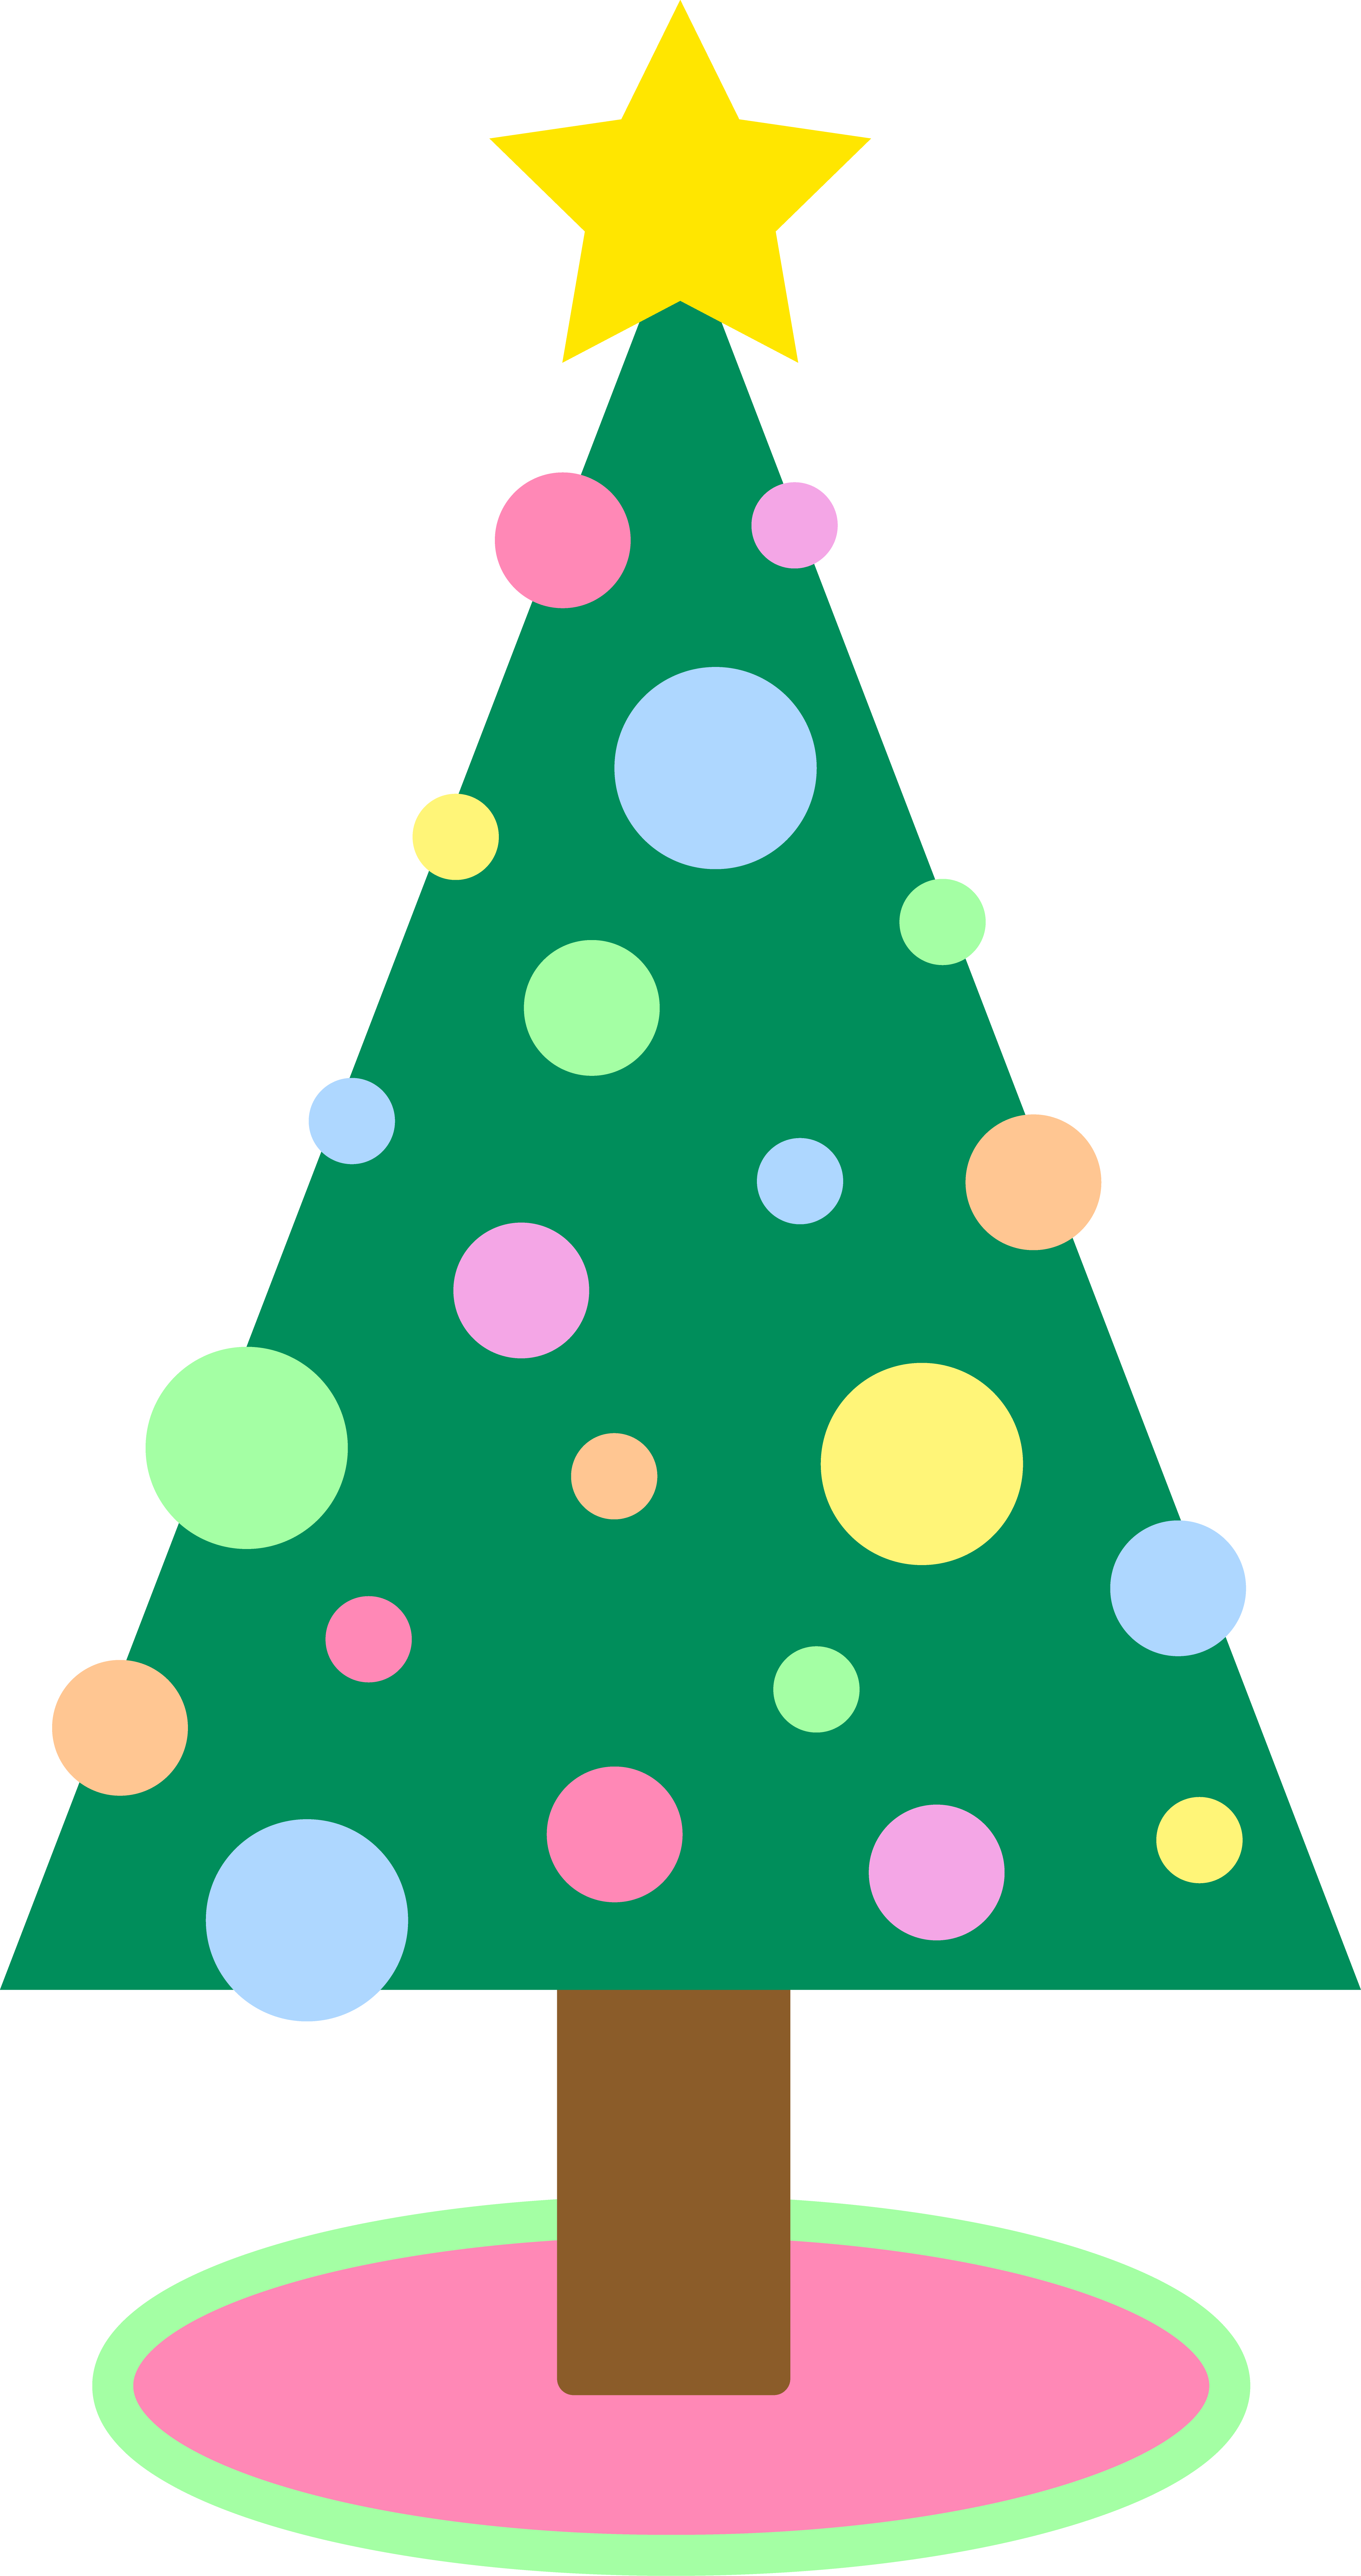 Cute Simple Pastel Colored Christmas Tree - Free Clip Art